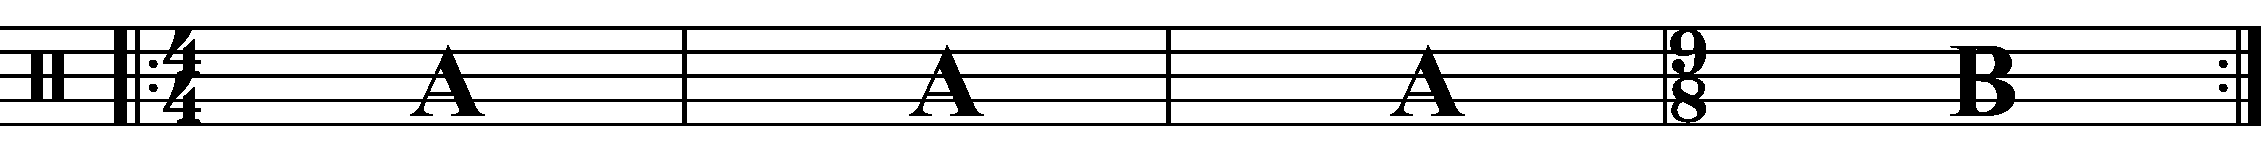 A four bar phrase using compound time 9/8 for the 'B' section.